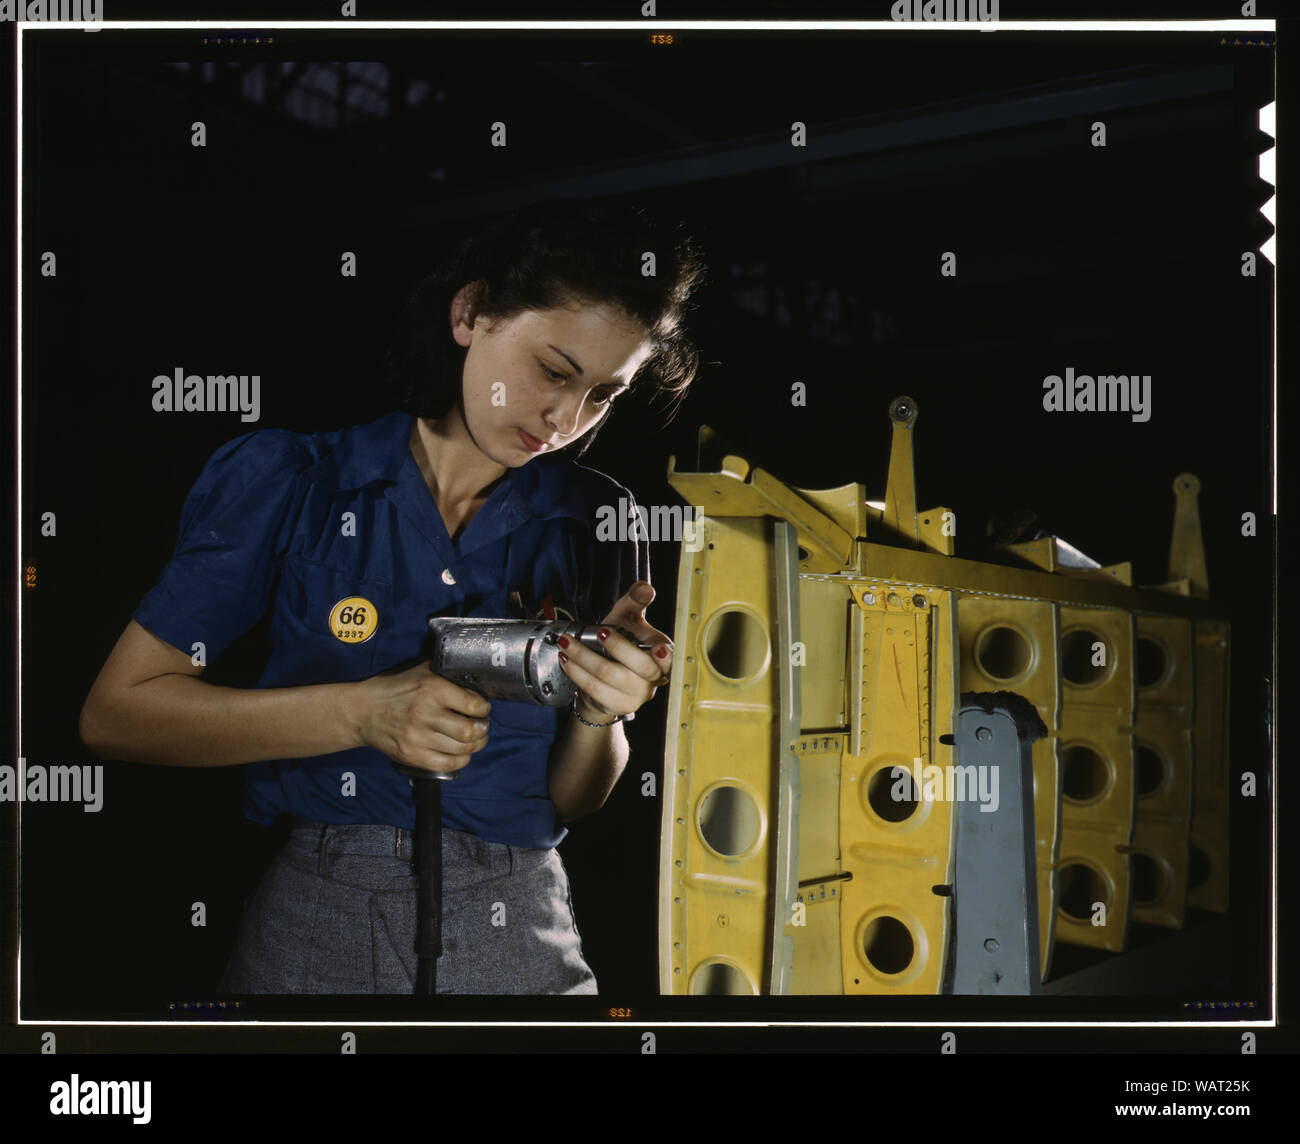 Drilling horizontal stabilizers: operating a hand drill, this woman worker at Vultee-Nashville is shown working on the horizontal stabilizer for a Vultee Vengeance dive bomber, Tennessee. The Vengeance (A-31) was originally designed for the French. It was later adopted by the R.A.F. and still later by the U.S. Army Air Forces. It is a single-engine, low-wing plane, carrying a crew of two men and having six machine guns of varying calibers Stock Photo